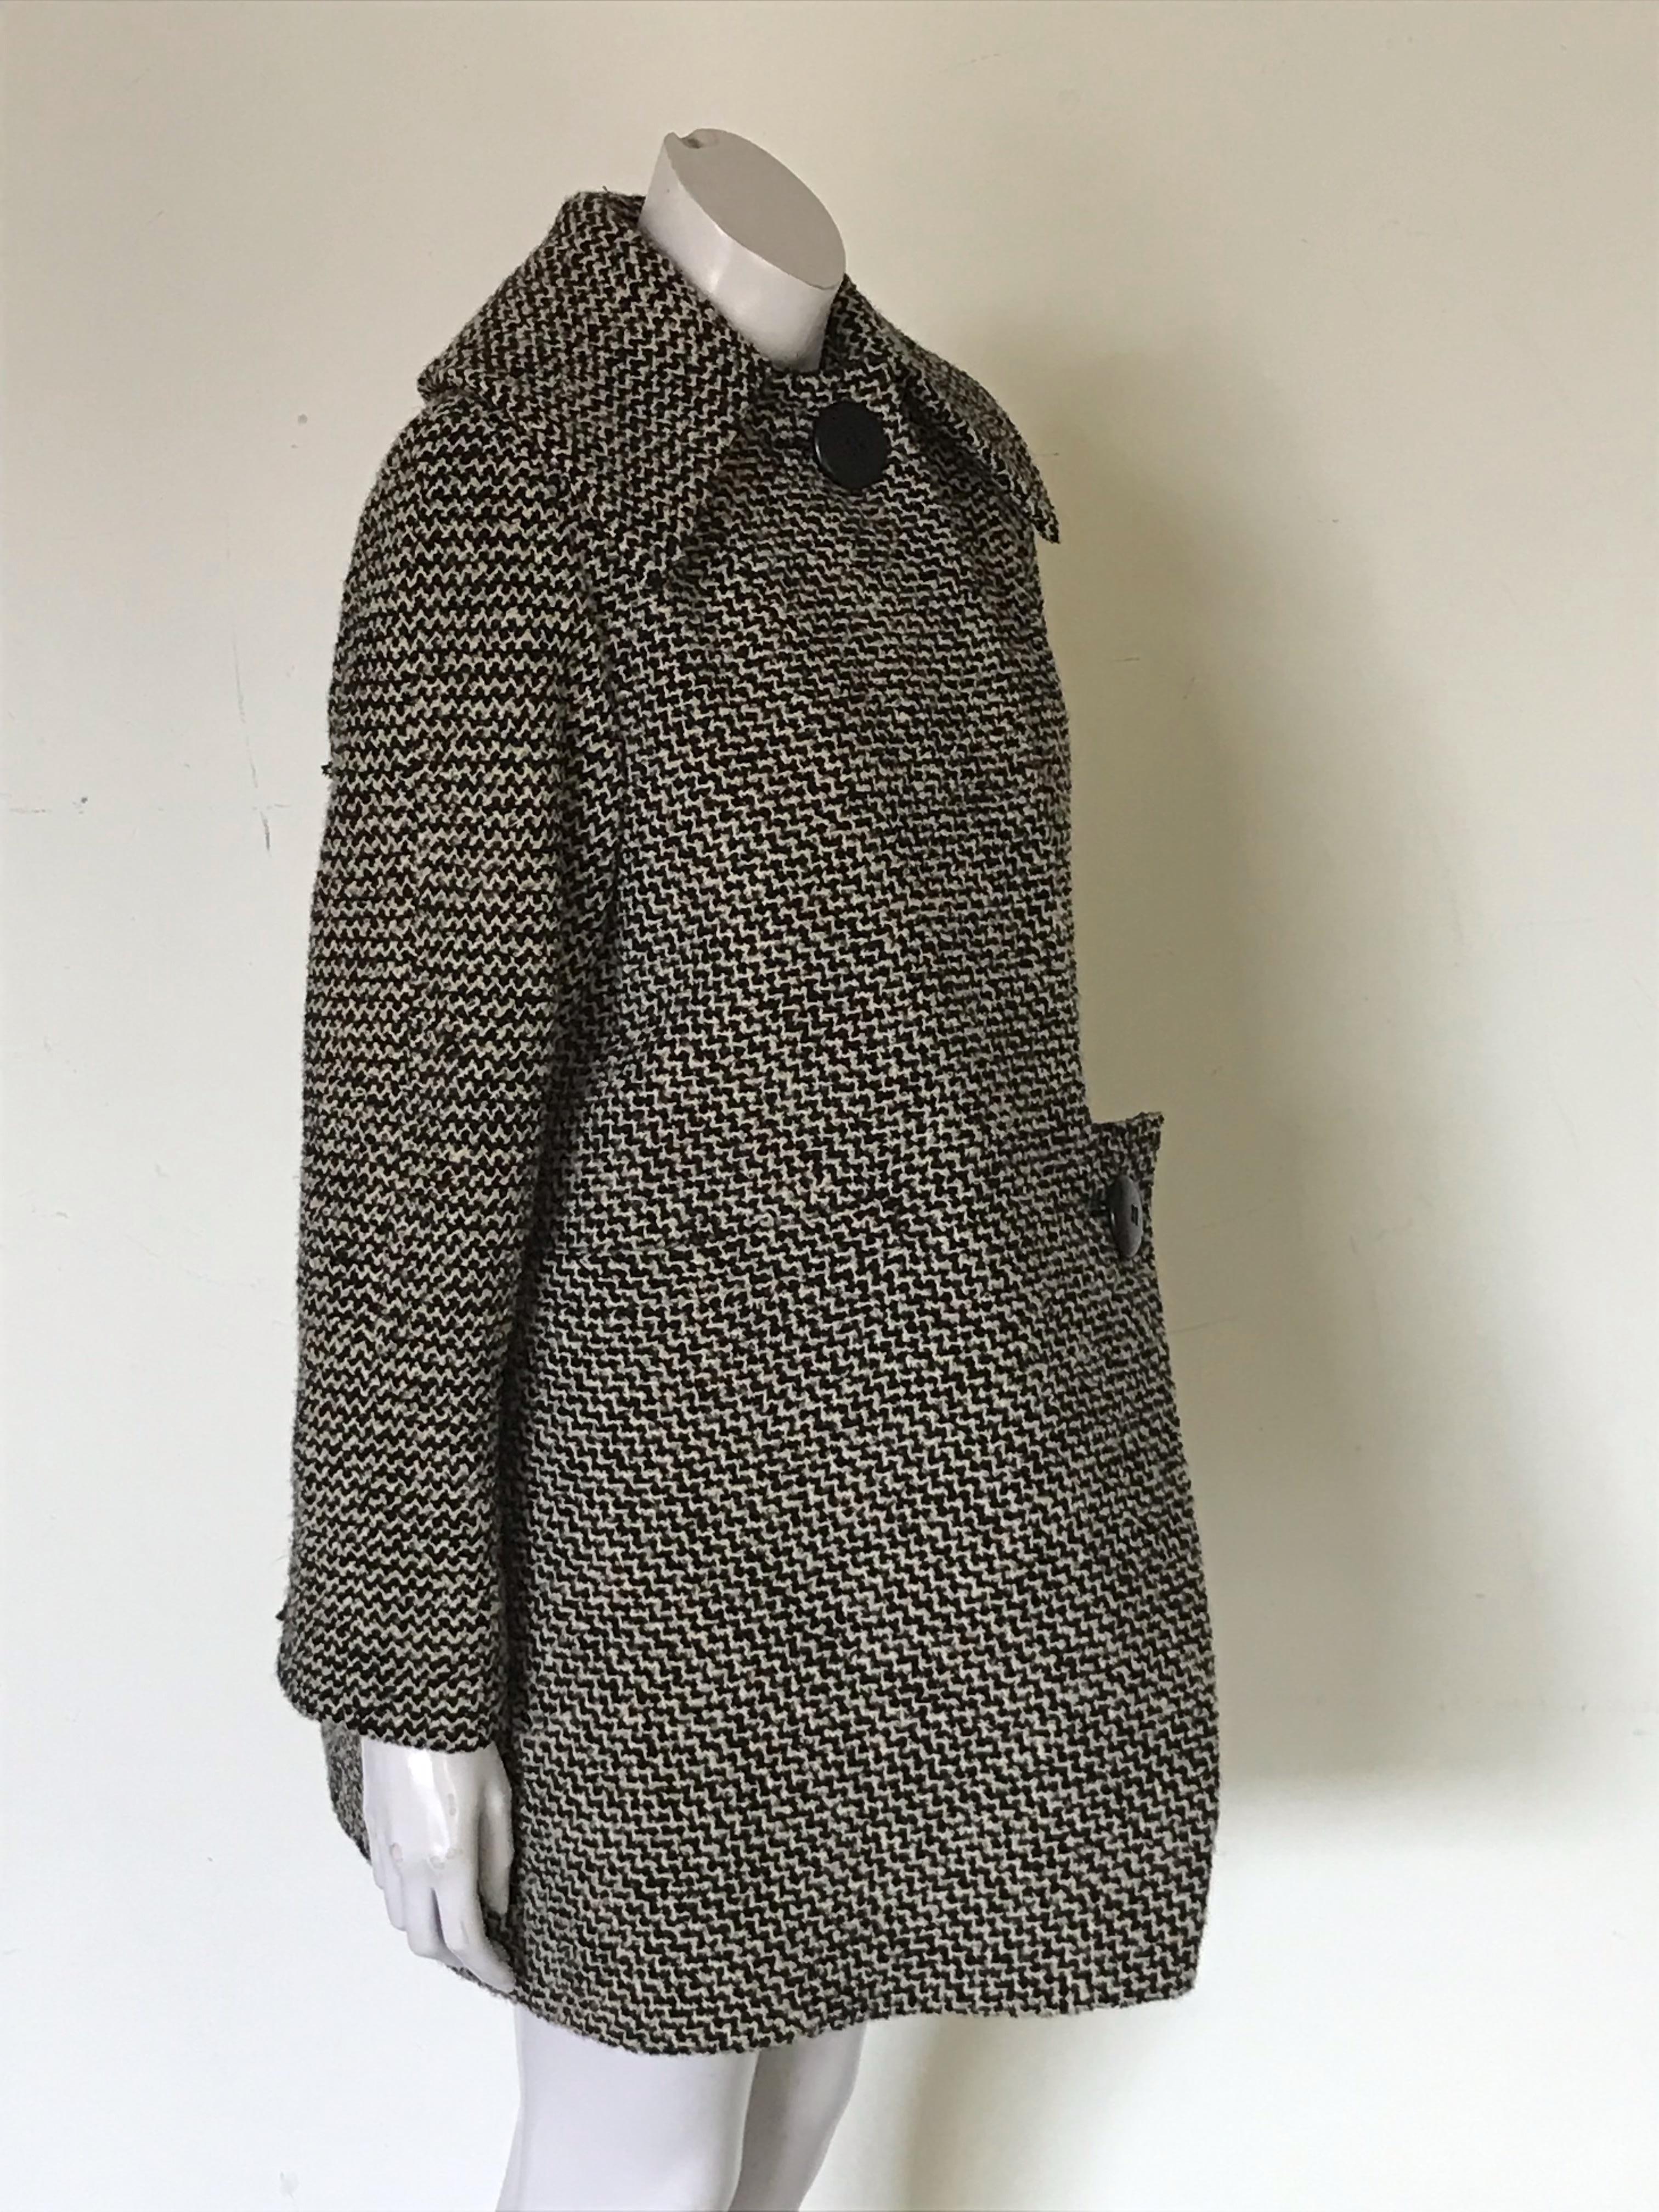 This is a two-piece weed coat and dress set from Pauline Trigere, this appears to be 1960s era.

Coat features asymmetric front, two button closure, two horizontal front pockets .

Mid-calf length dress is fitted through waist, side zipper closure,